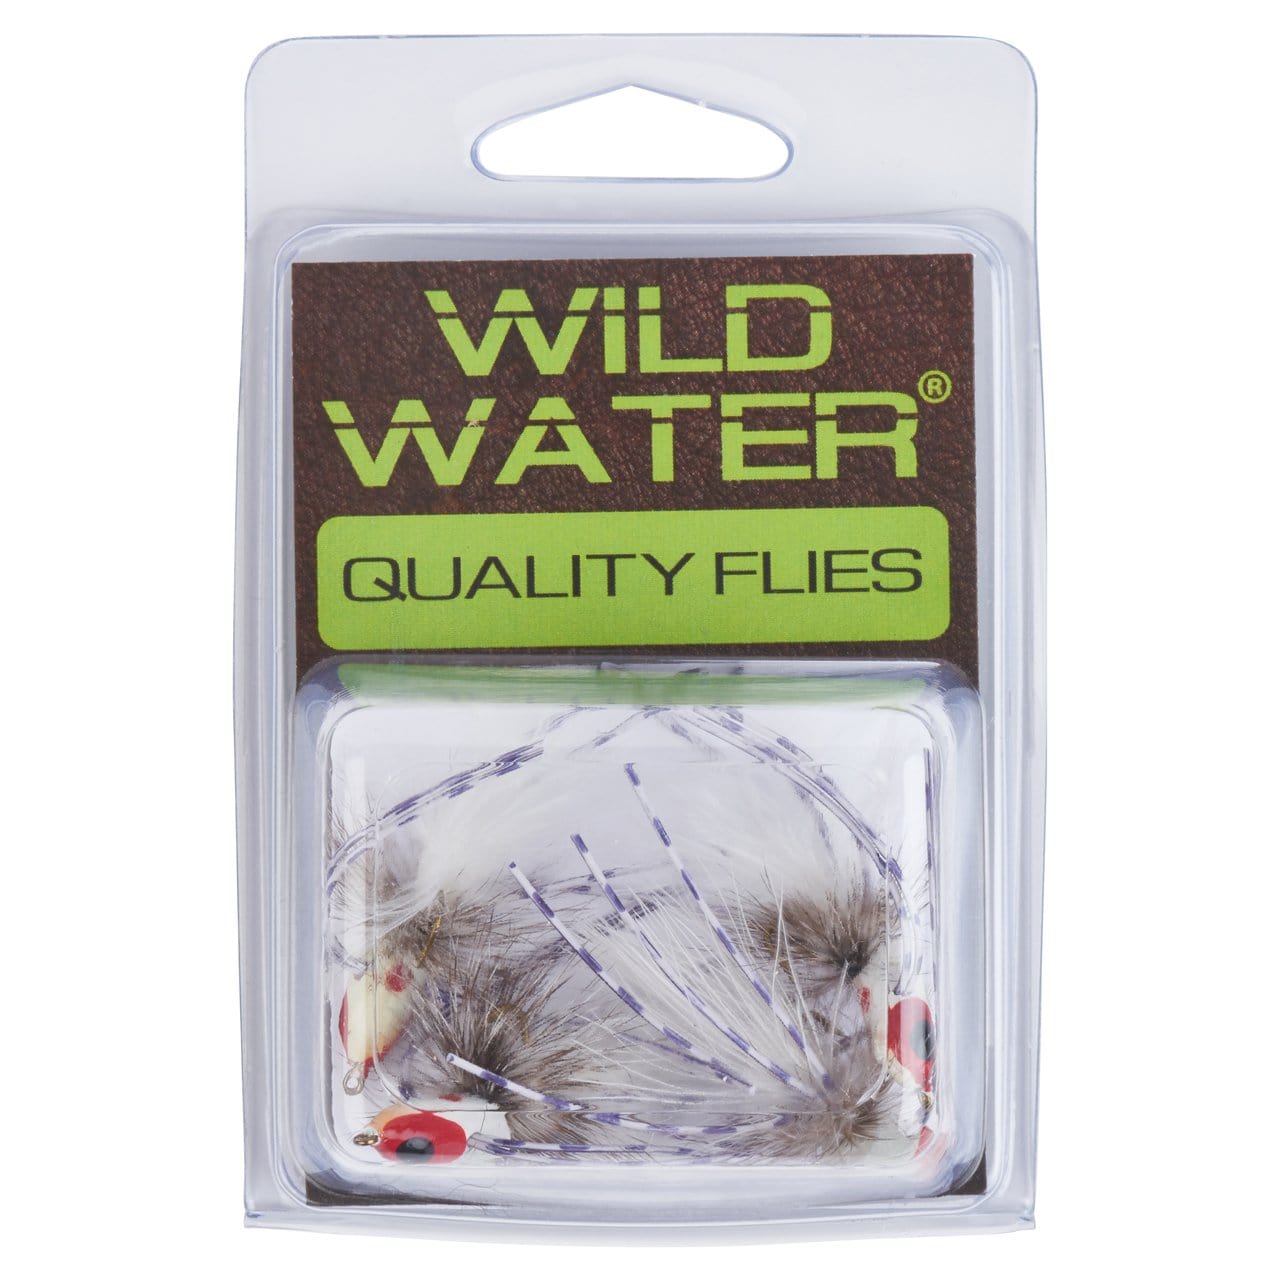 Wild Water Fly Fishing White Glow In The Dark Spider Leg Pointed Nose Slider Popper, Size 8, Qty. 4